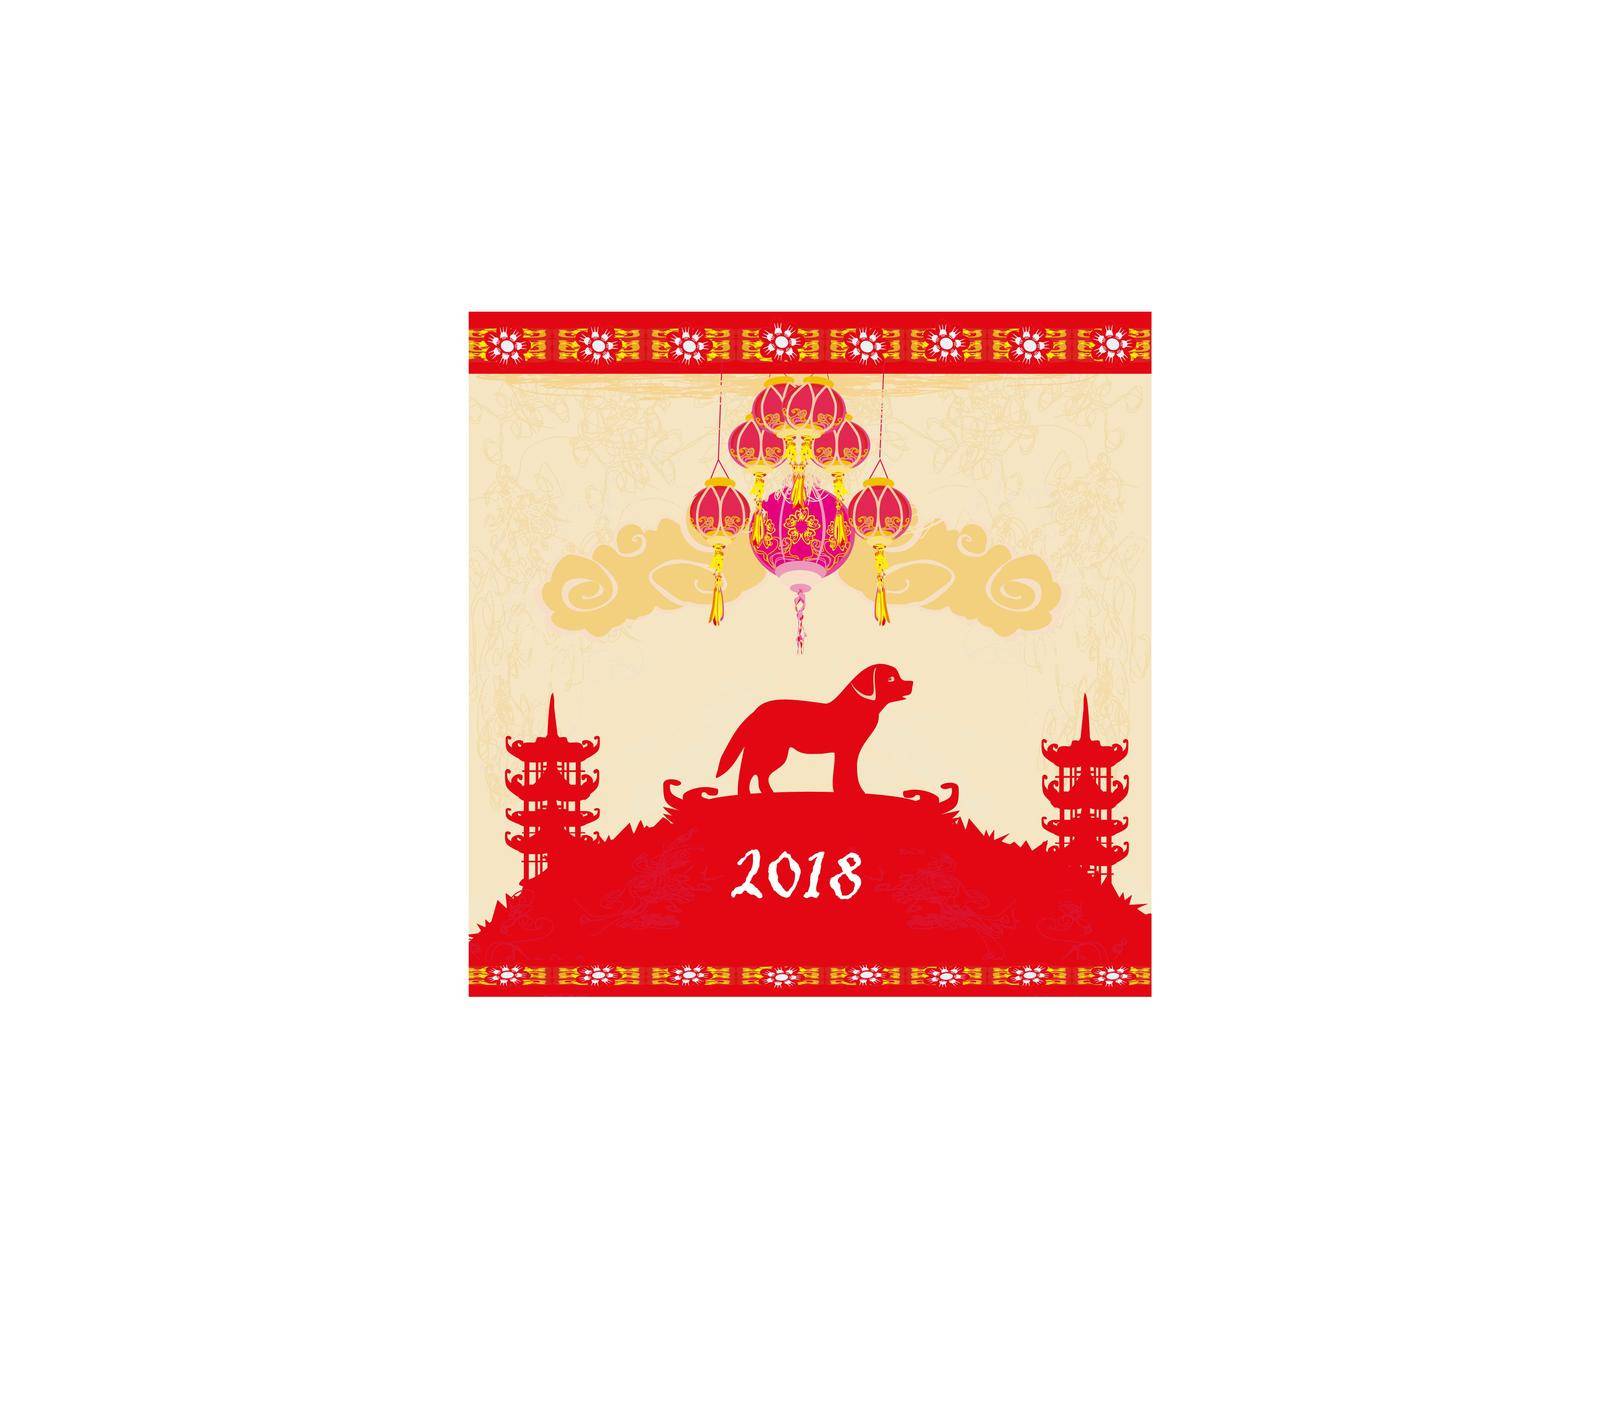 Chinese zodiac the year of Dog - frame by JackyBrown